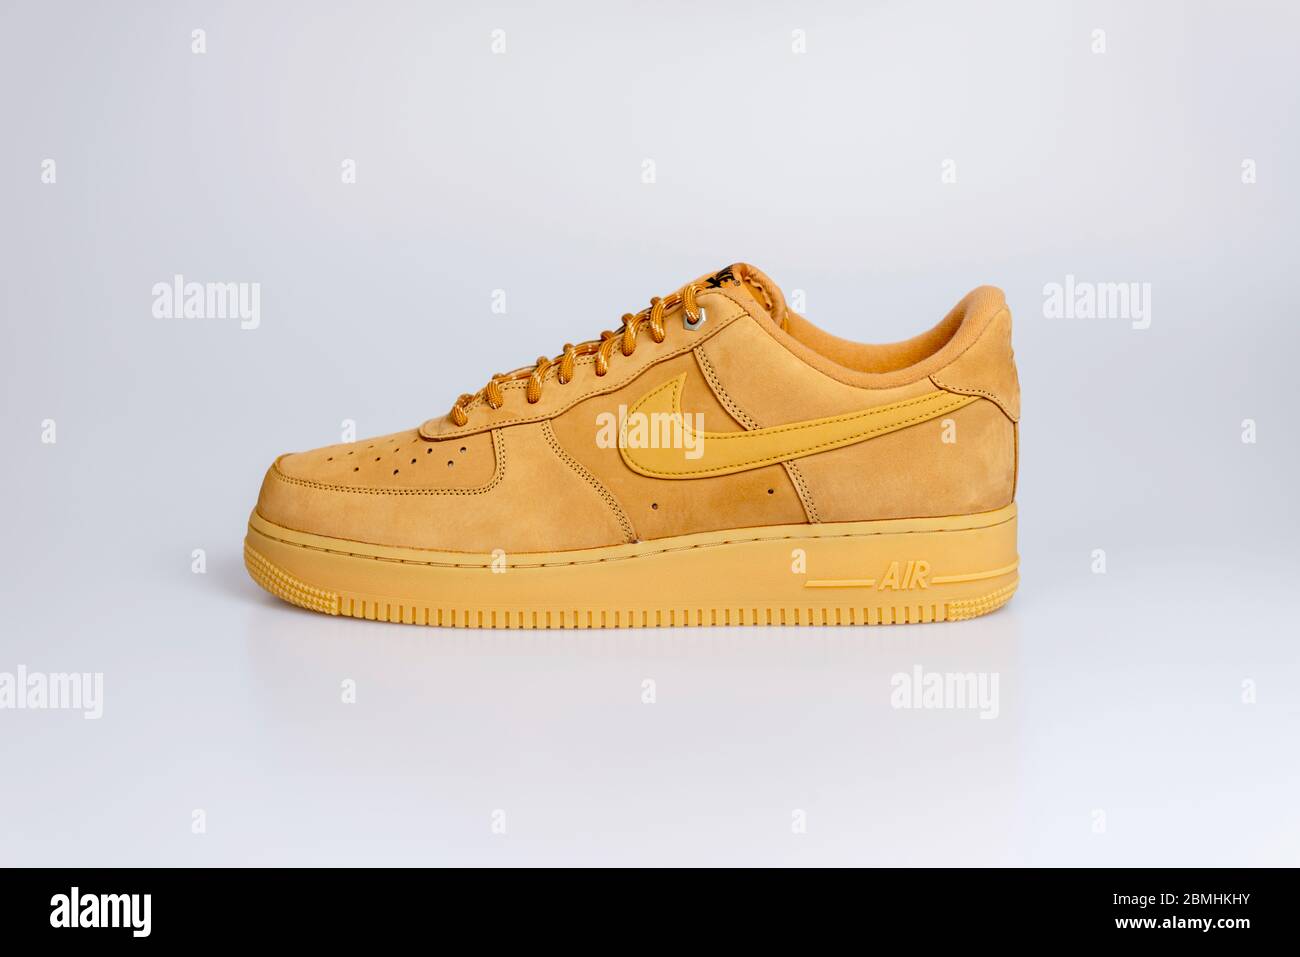 Nike Air Force light brown sneaker on white background Stock Photo - Alamy